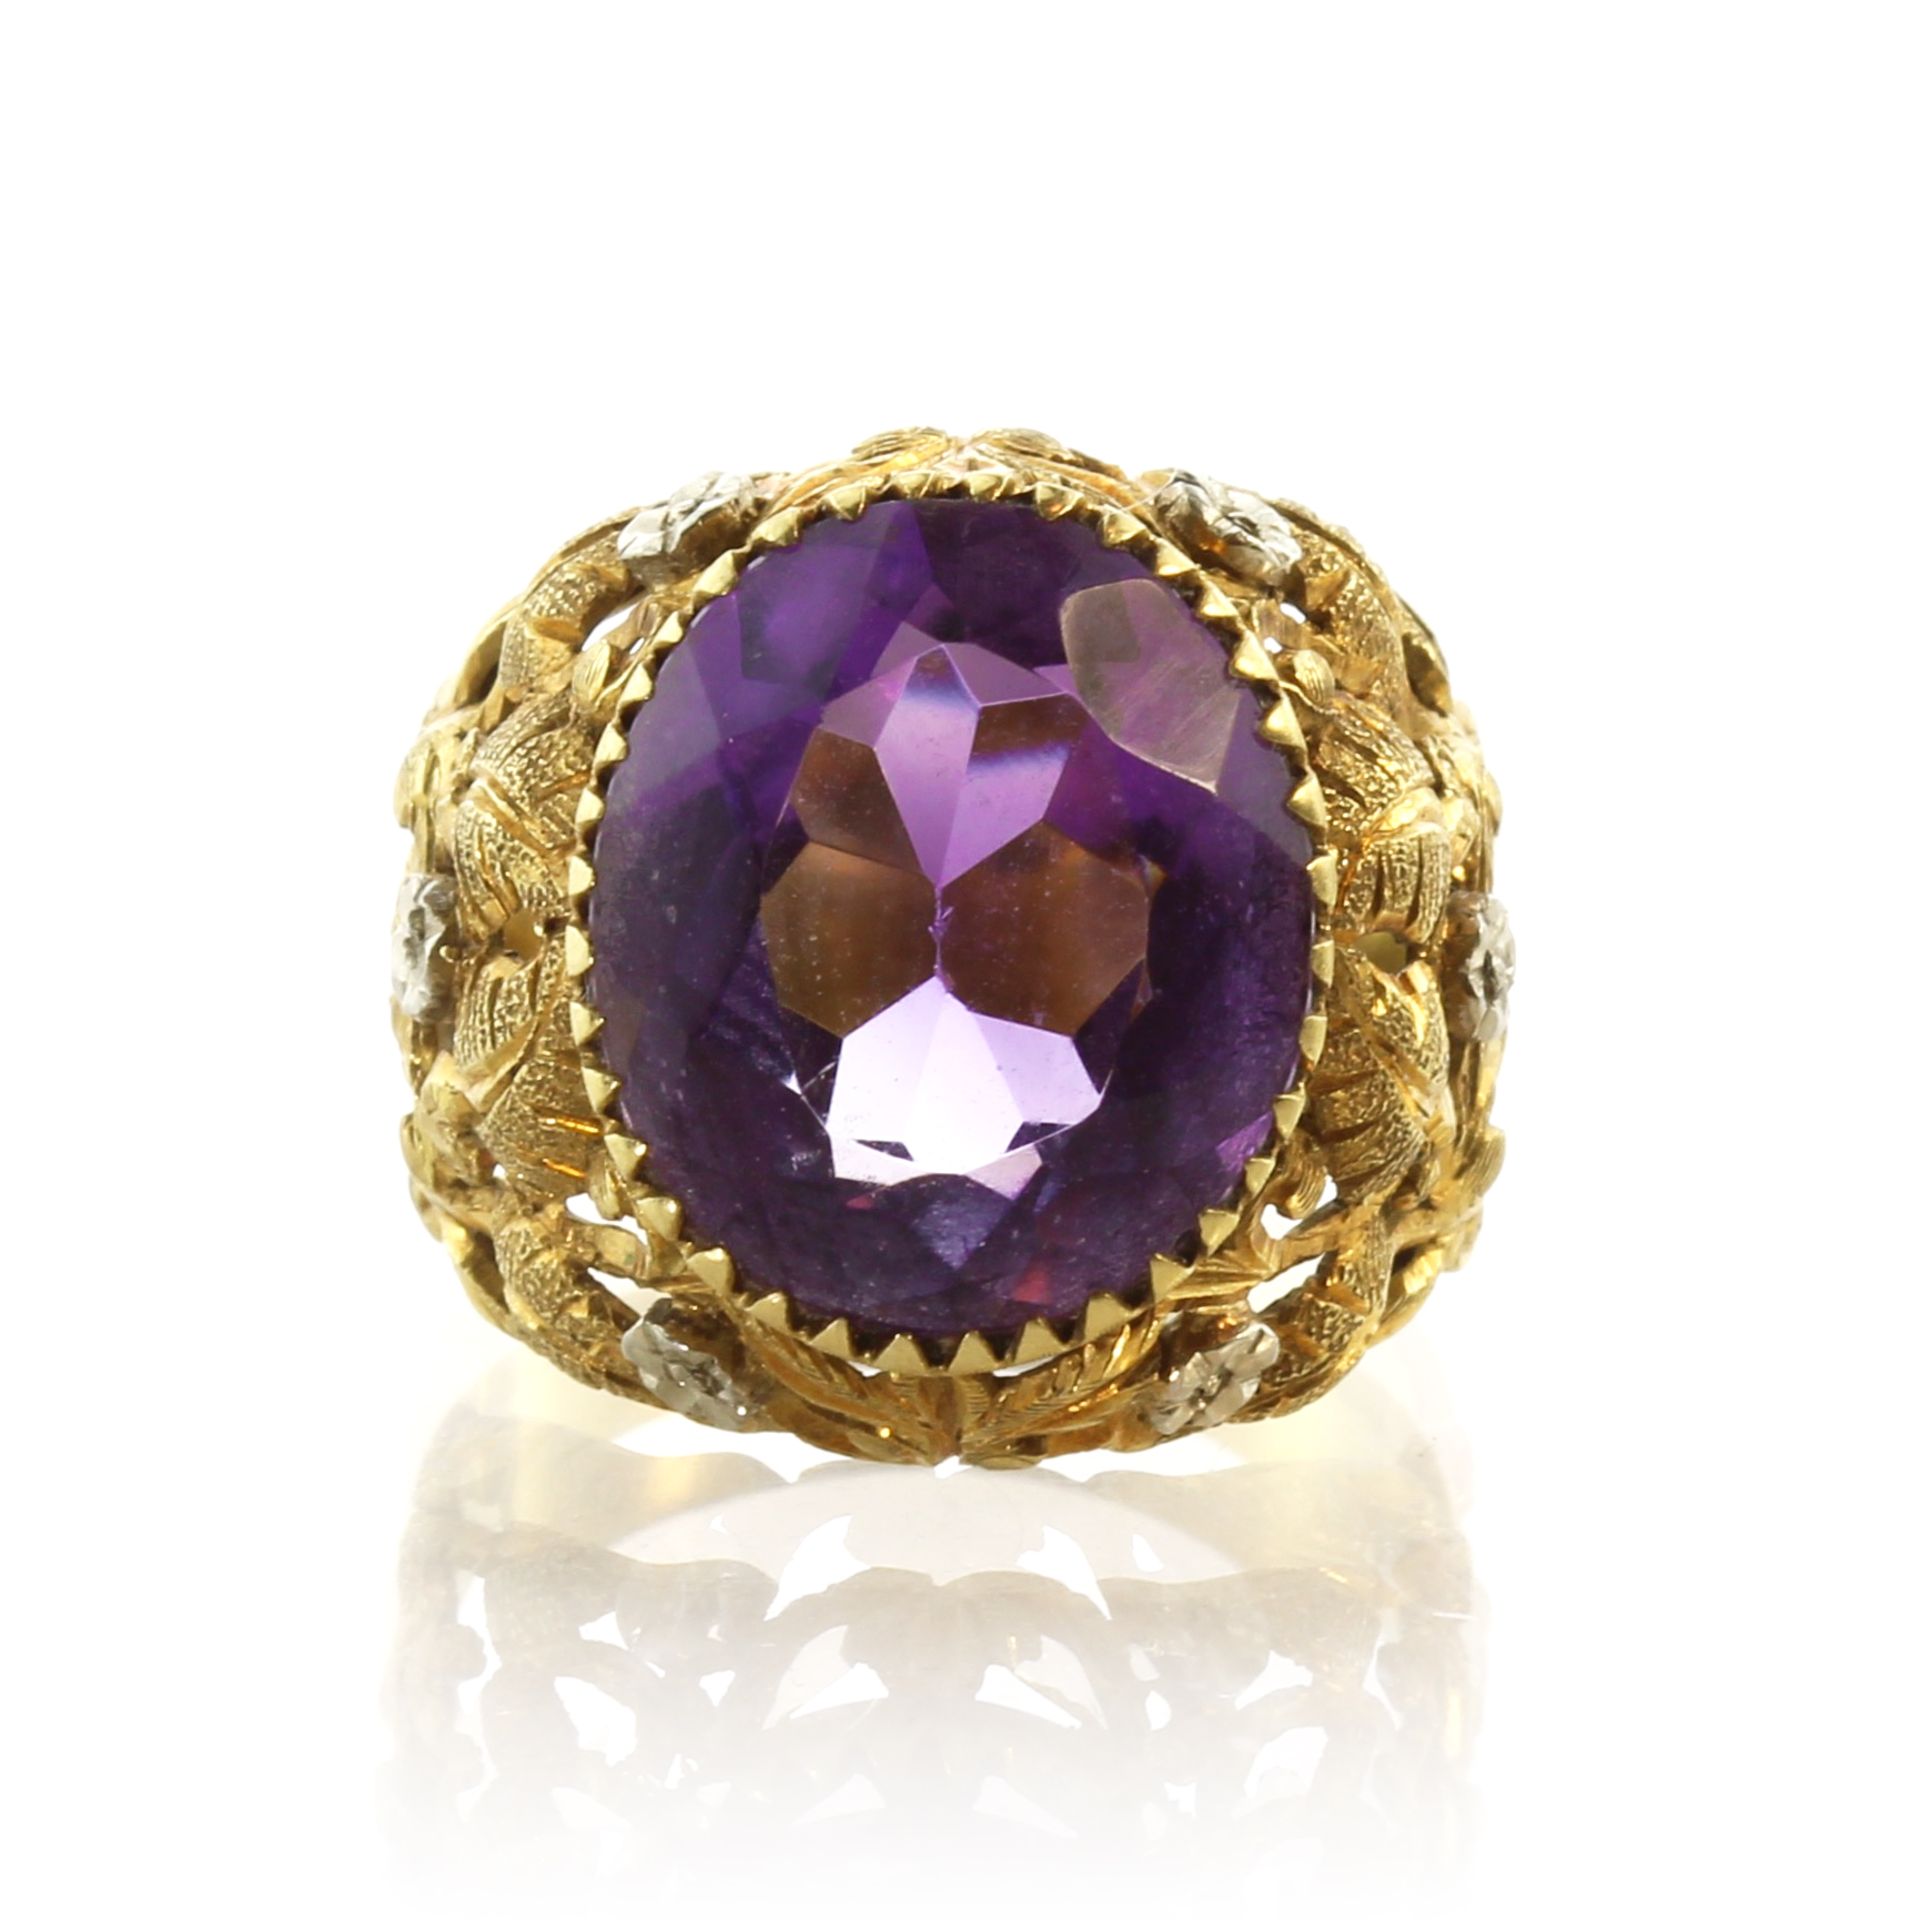 An amethyst dress ring in 18ct yellow gold set with a large oval cut amethyst set in a bombe style